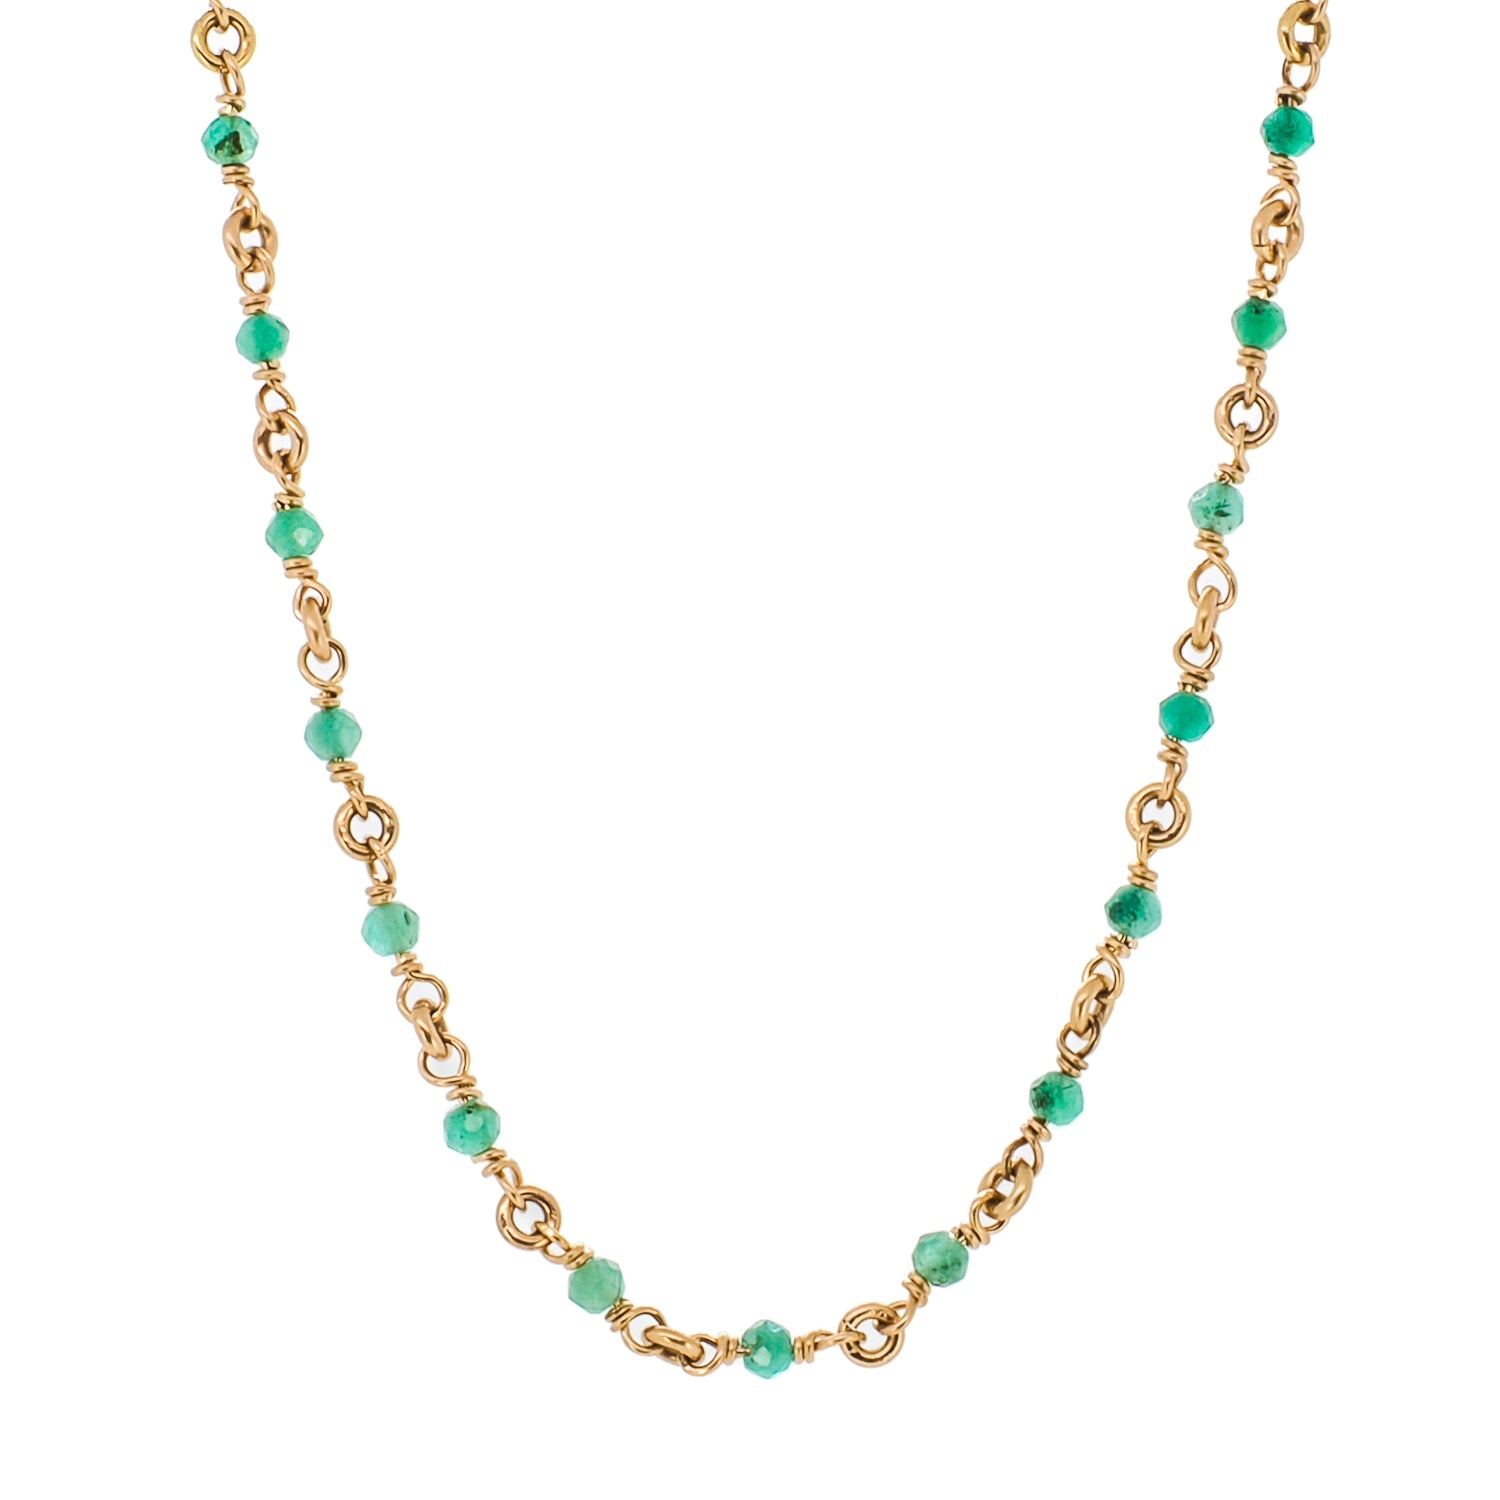 The Karya Jade Gold Necklace, featuring a 14-carat yellow gold eye pendant adorned with various natural stones, adding a touch of elegance and style.